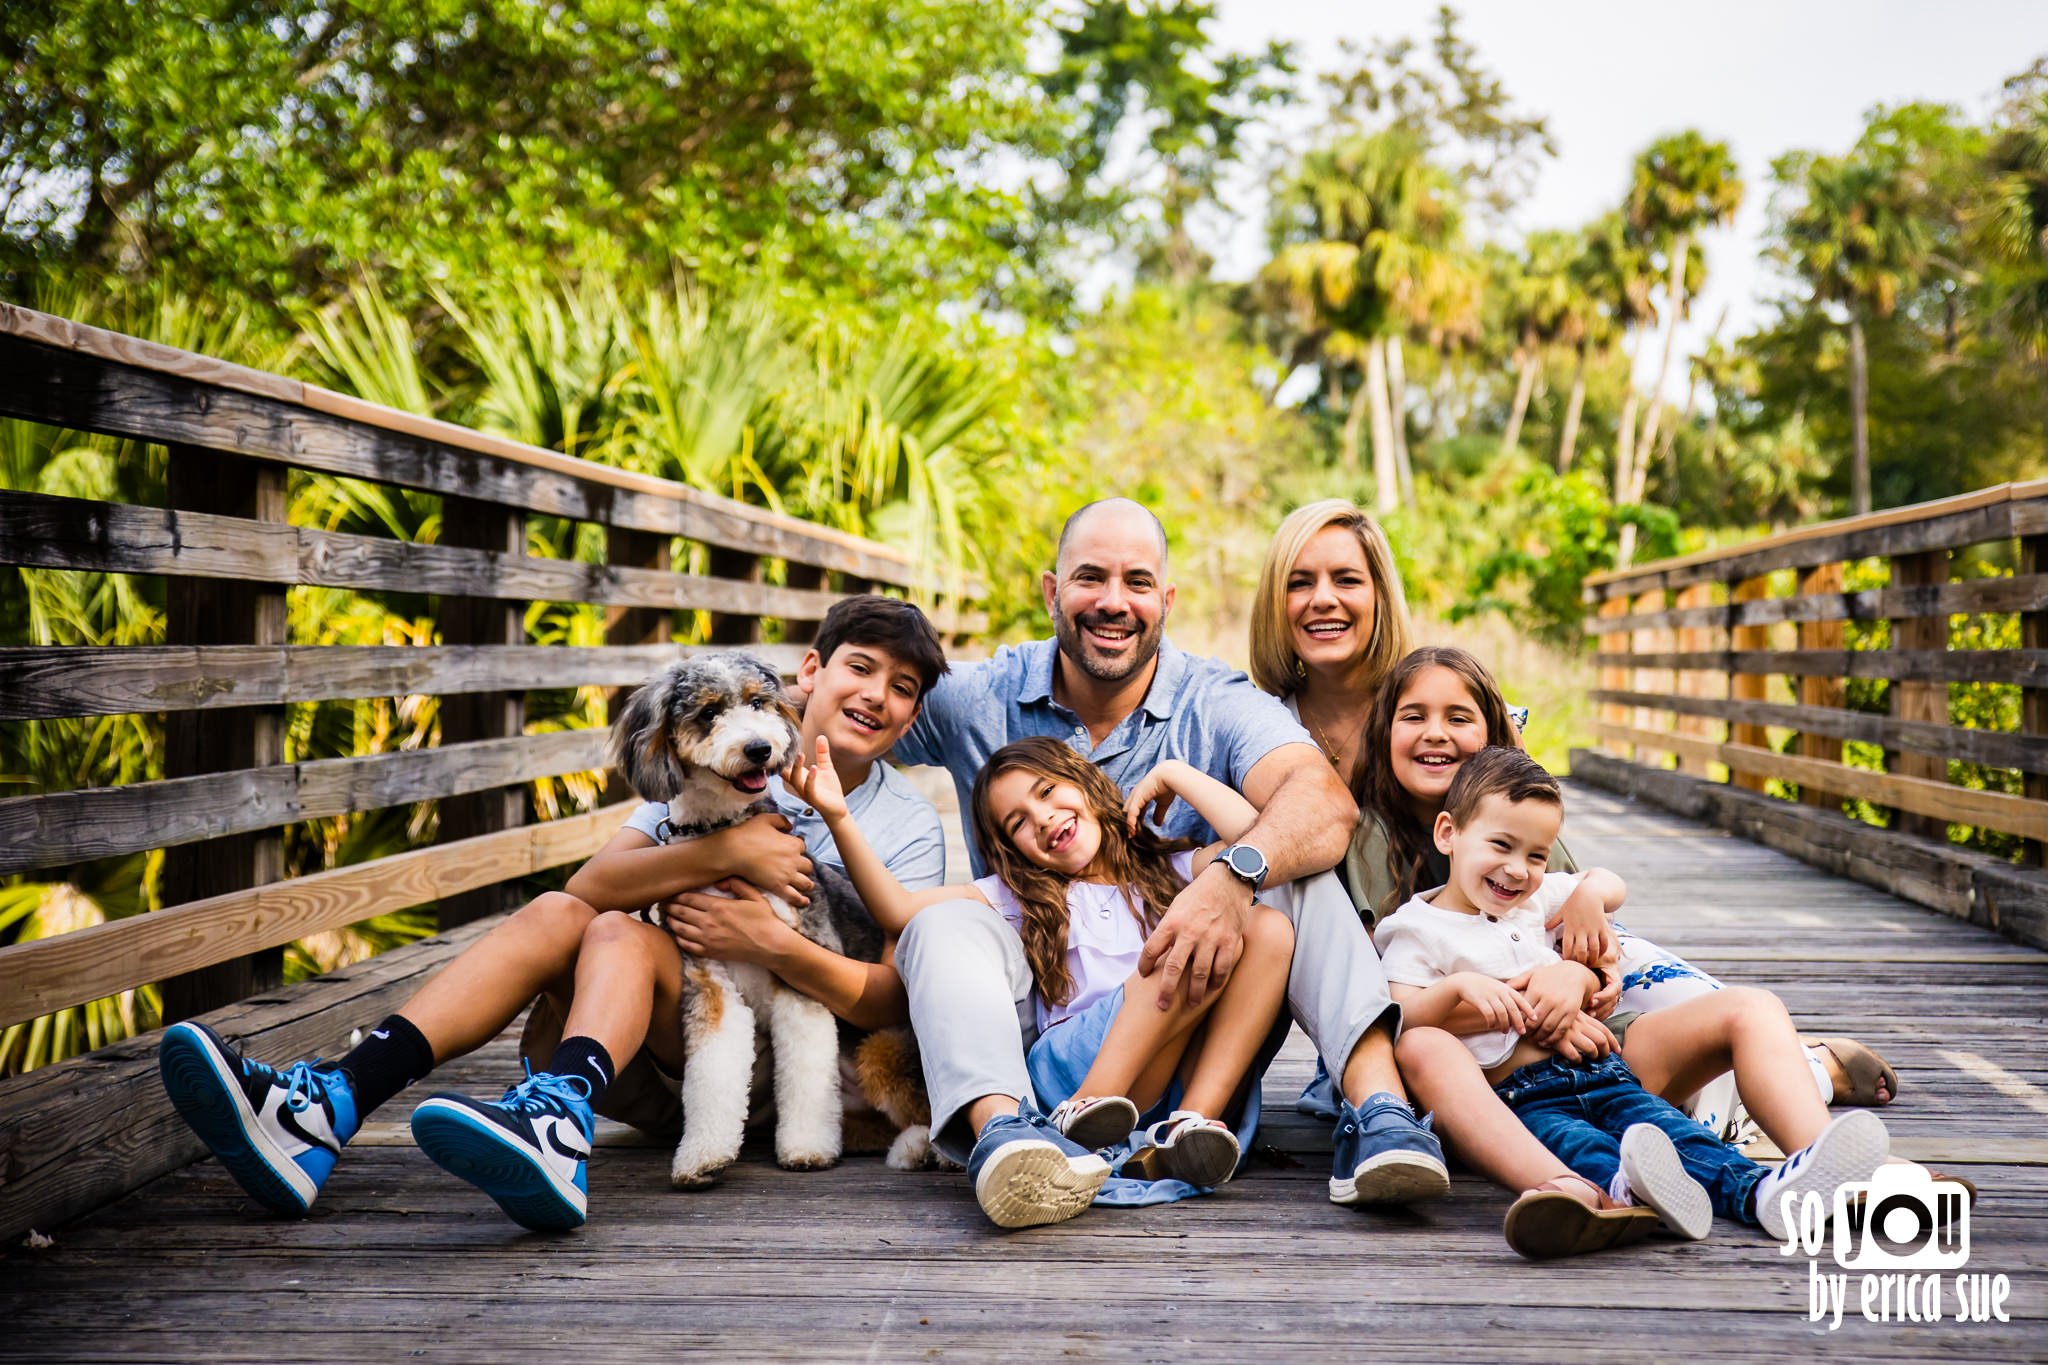 7-lifestyle-family-photographer-riverbend-park-jupiter-fl-so-you-by-erica-sue-ES1_8182.JPG